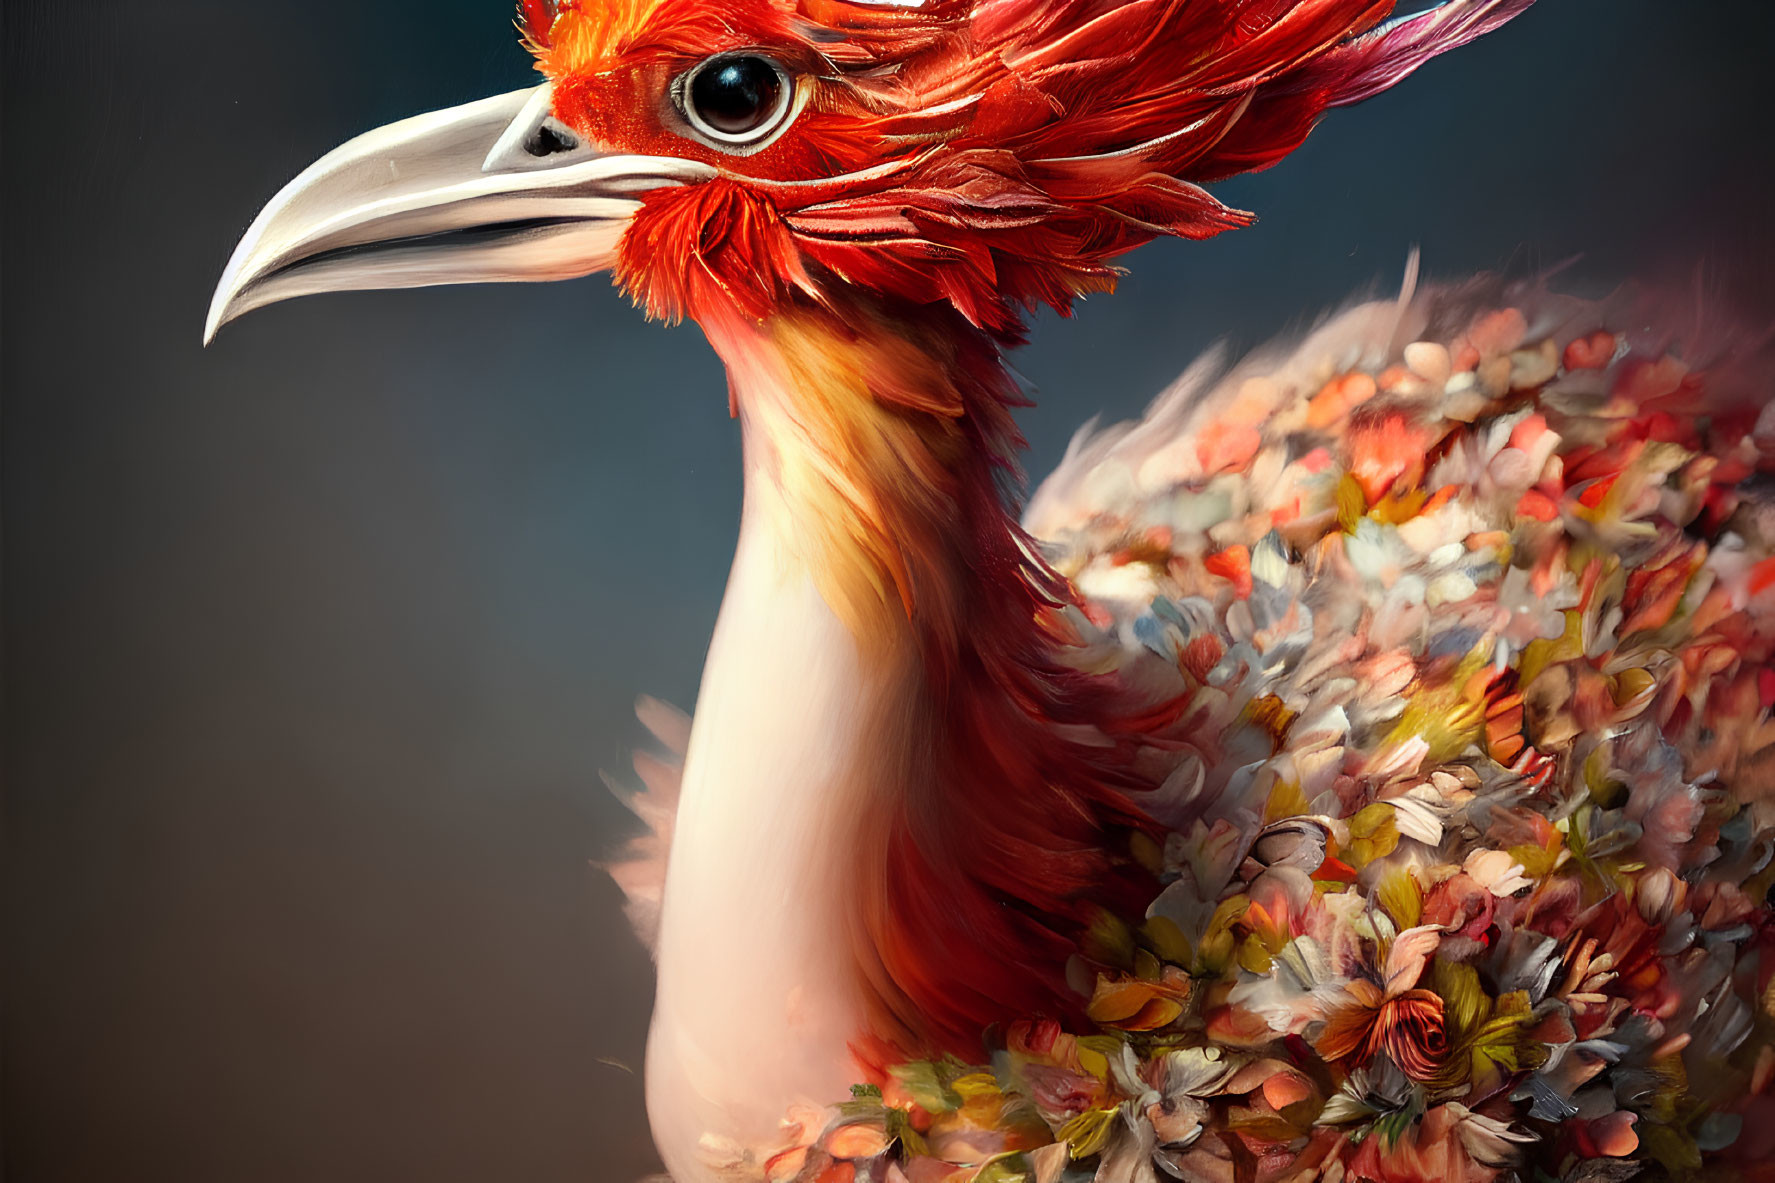 Vibrant bird artwork with white beak and red feathers among floral textures